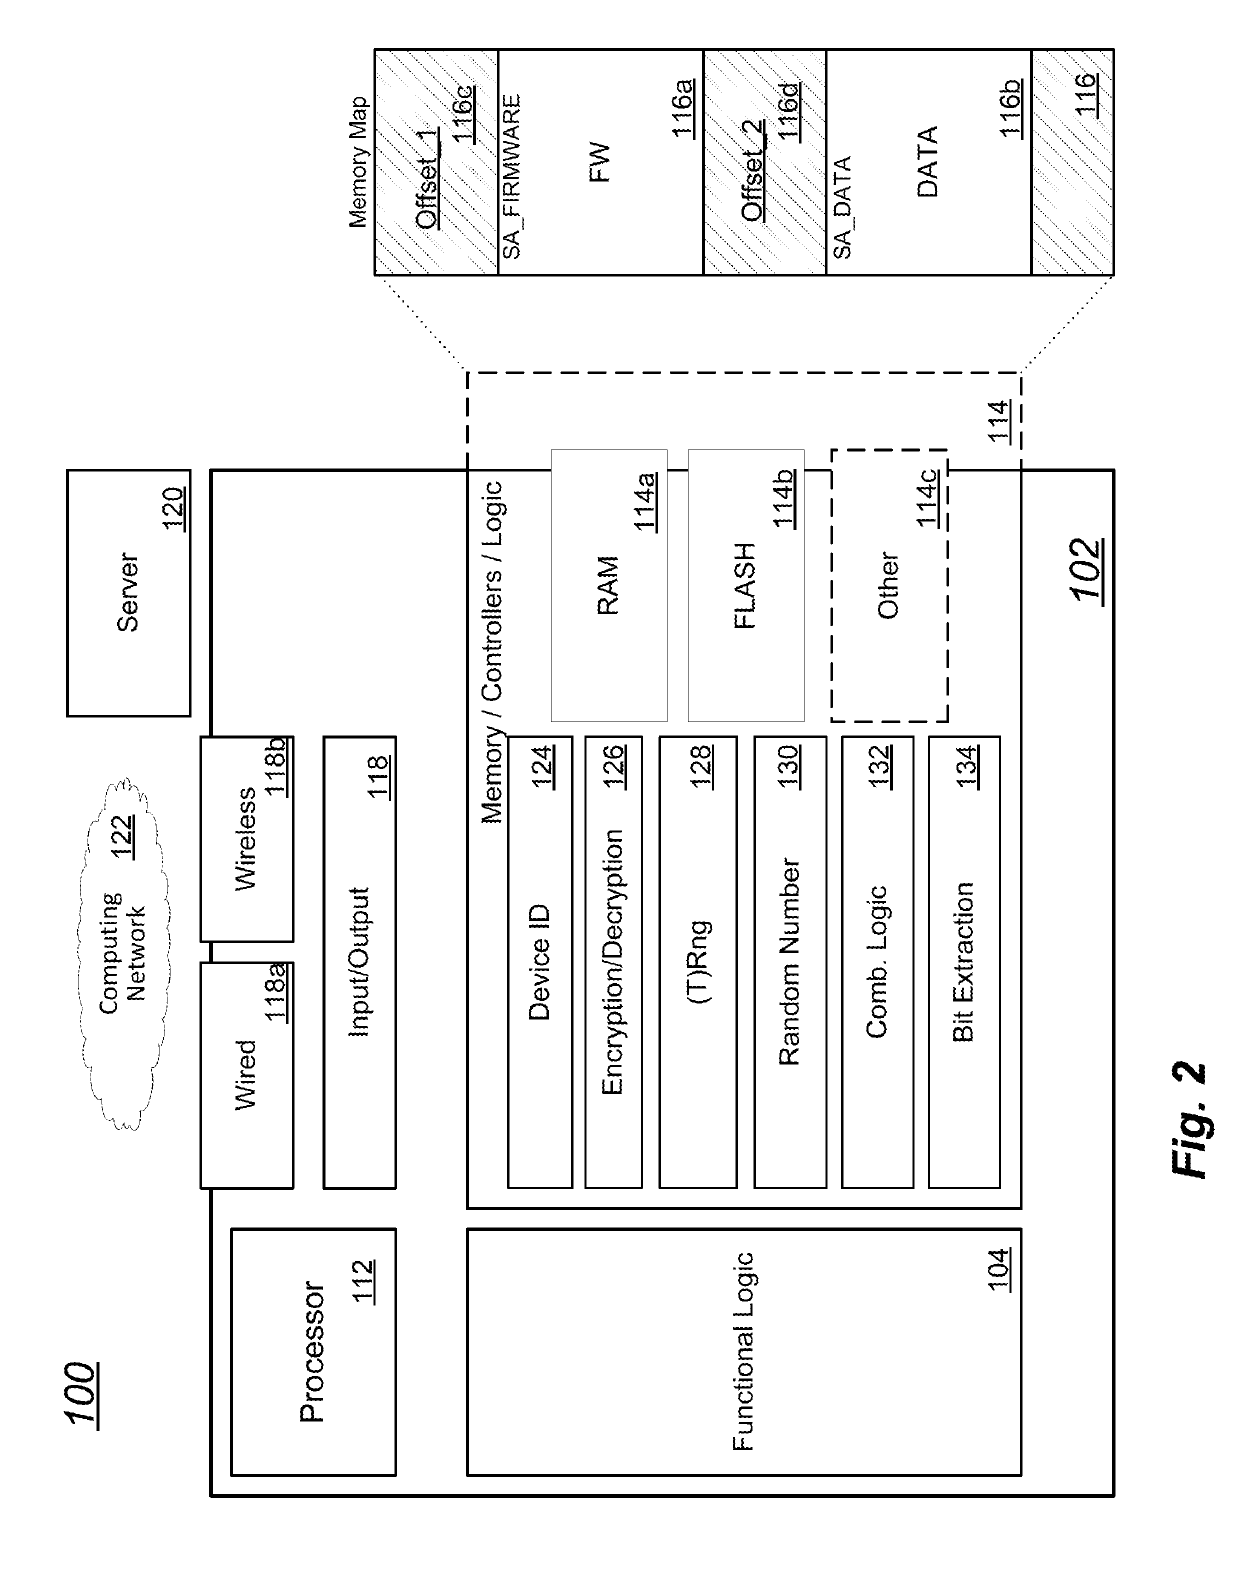 Secure firmware provisioning and device binding mechanism